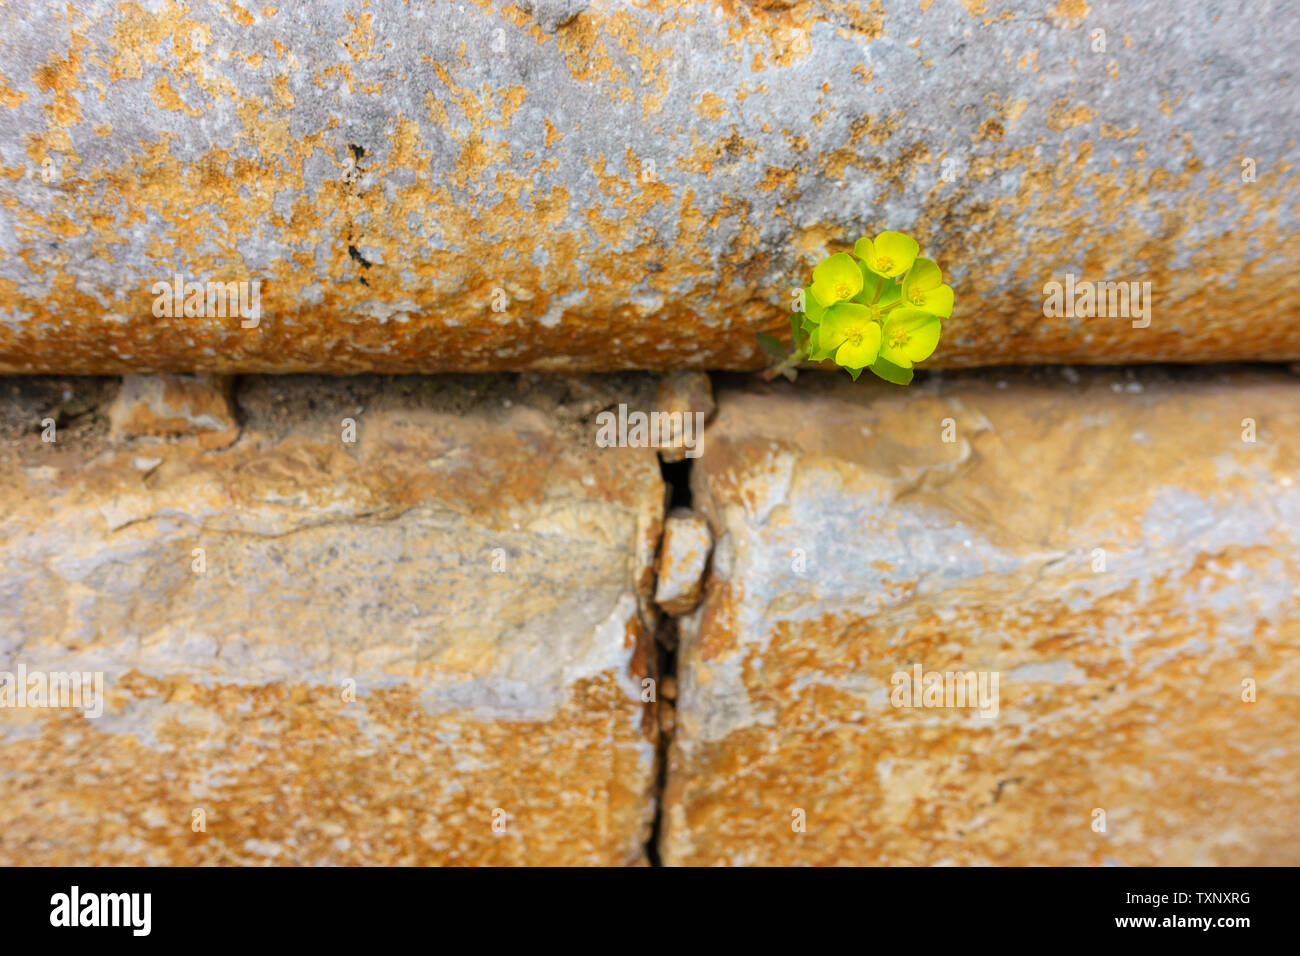 One vibrant green plant with some blossoms grows out of a barren stone wall - symbol for power, accomplishment, confidence, hope, growth - focus on fl Stock Photo